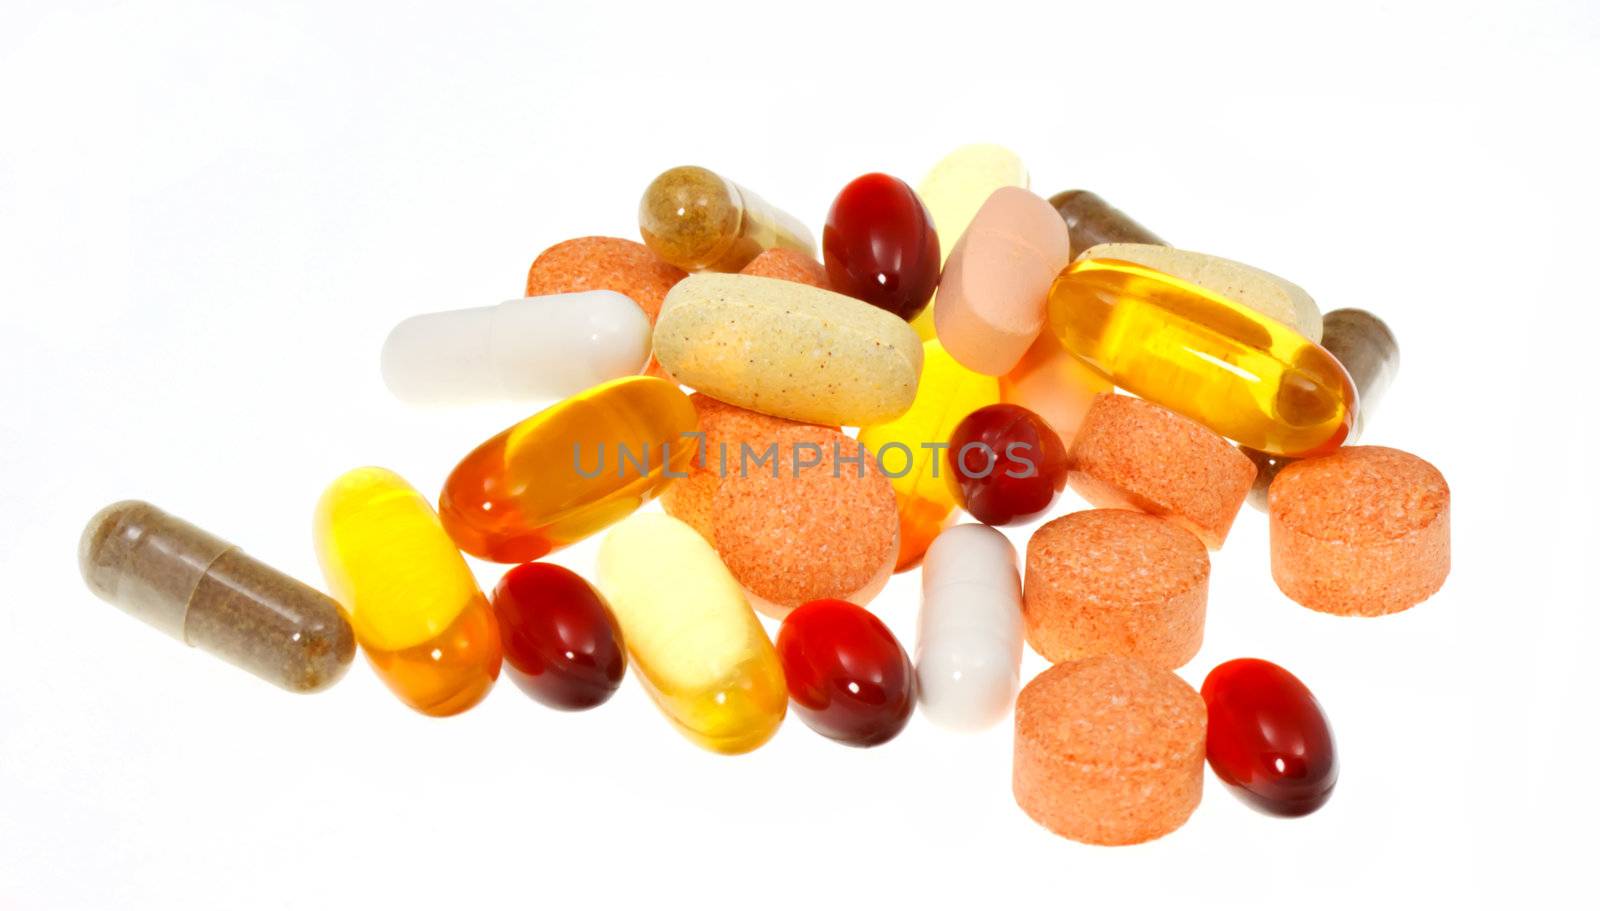 Supplements isolated on white background